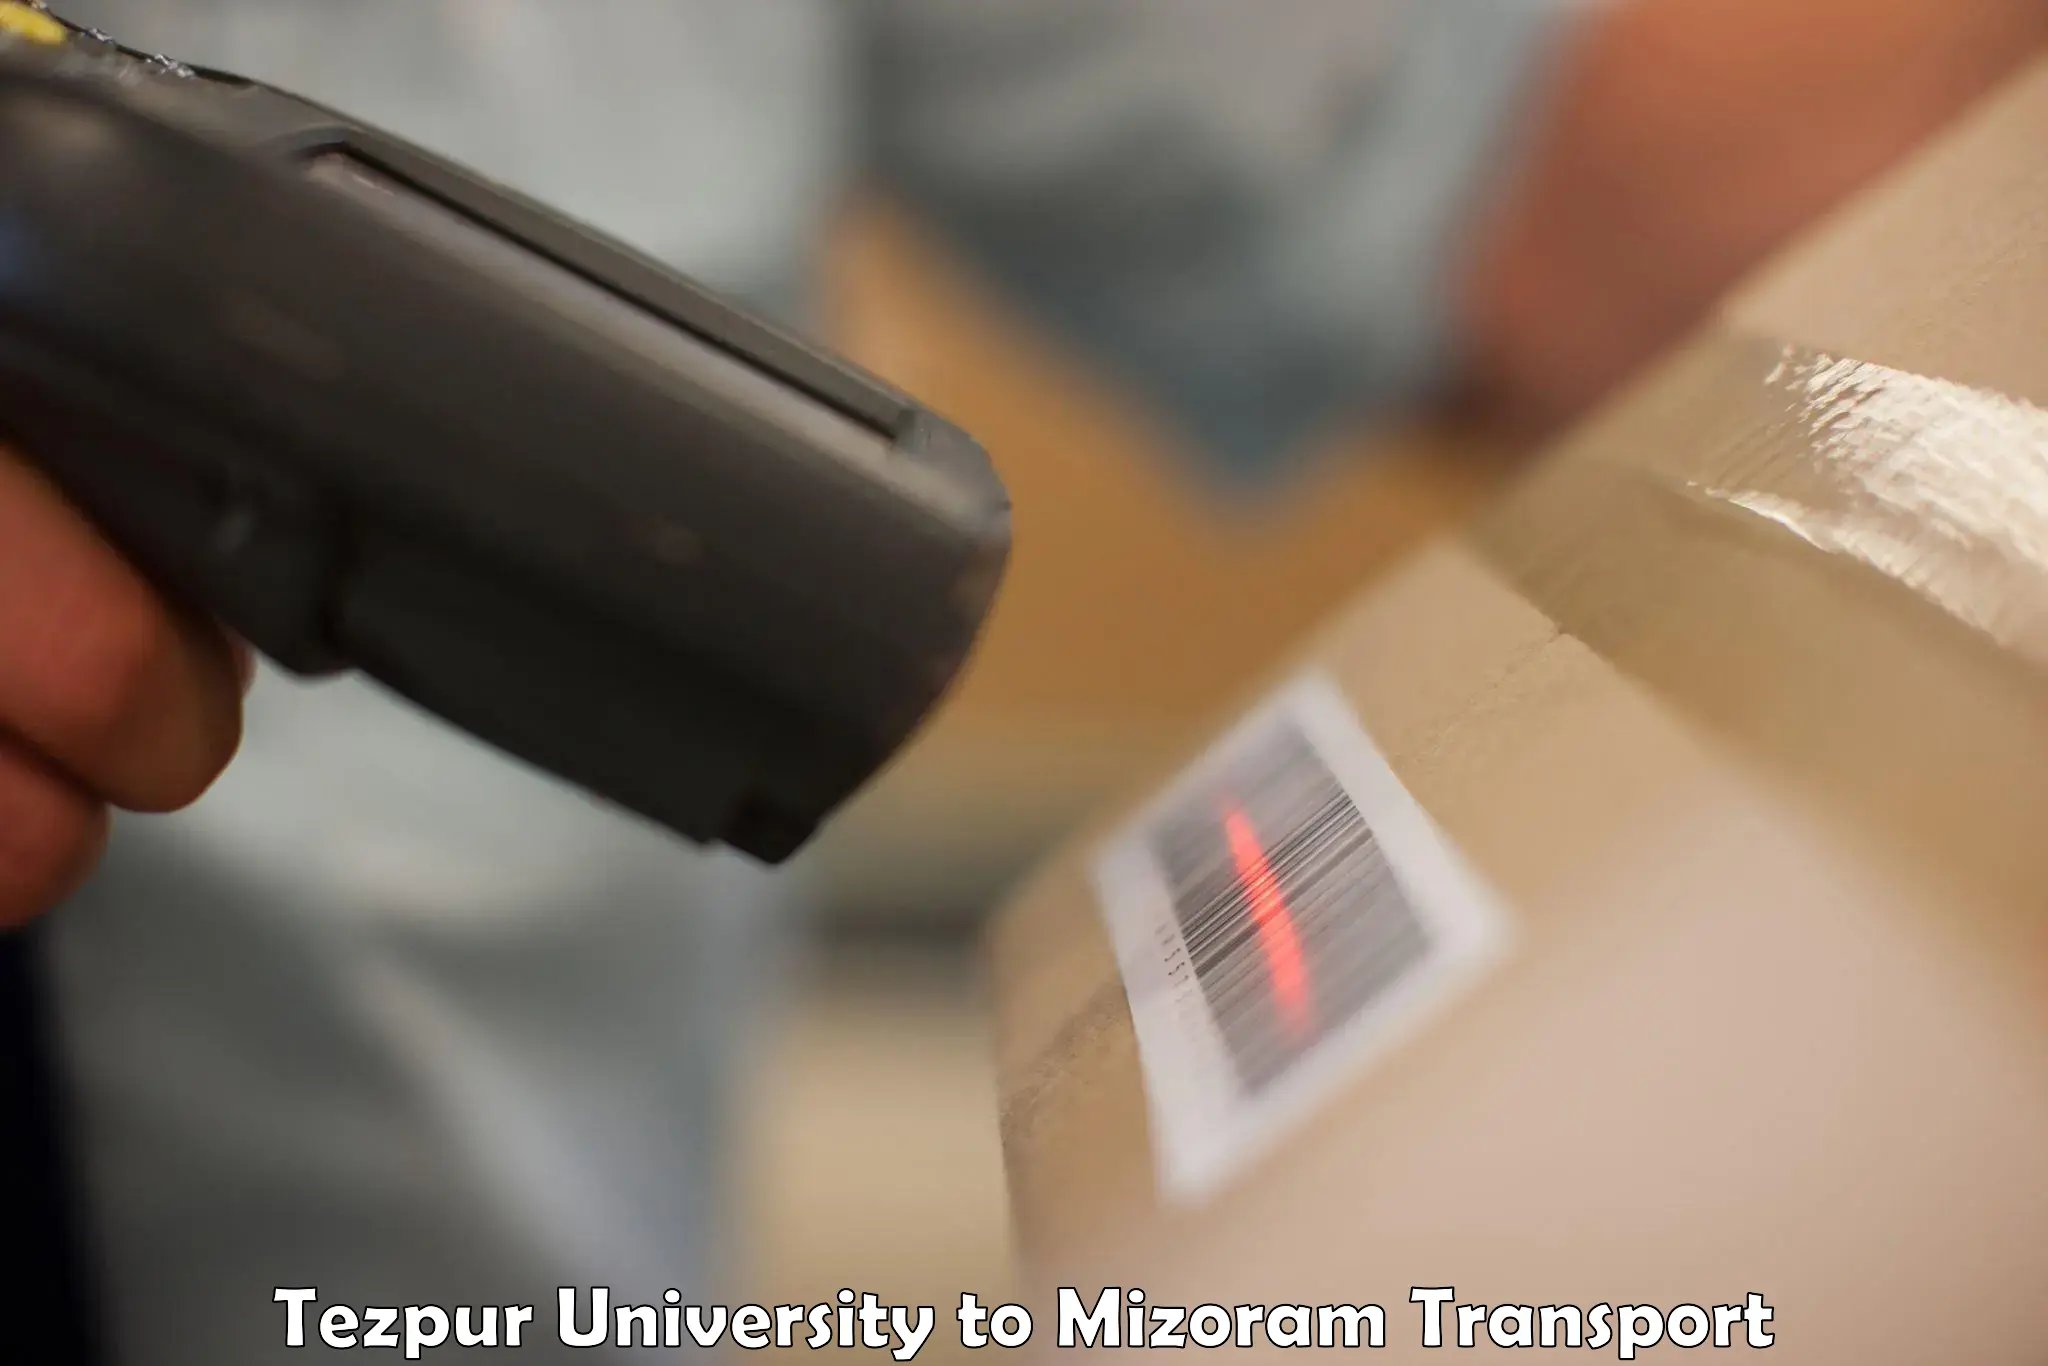 Cargo train transport services in Tezpur University to Siaha